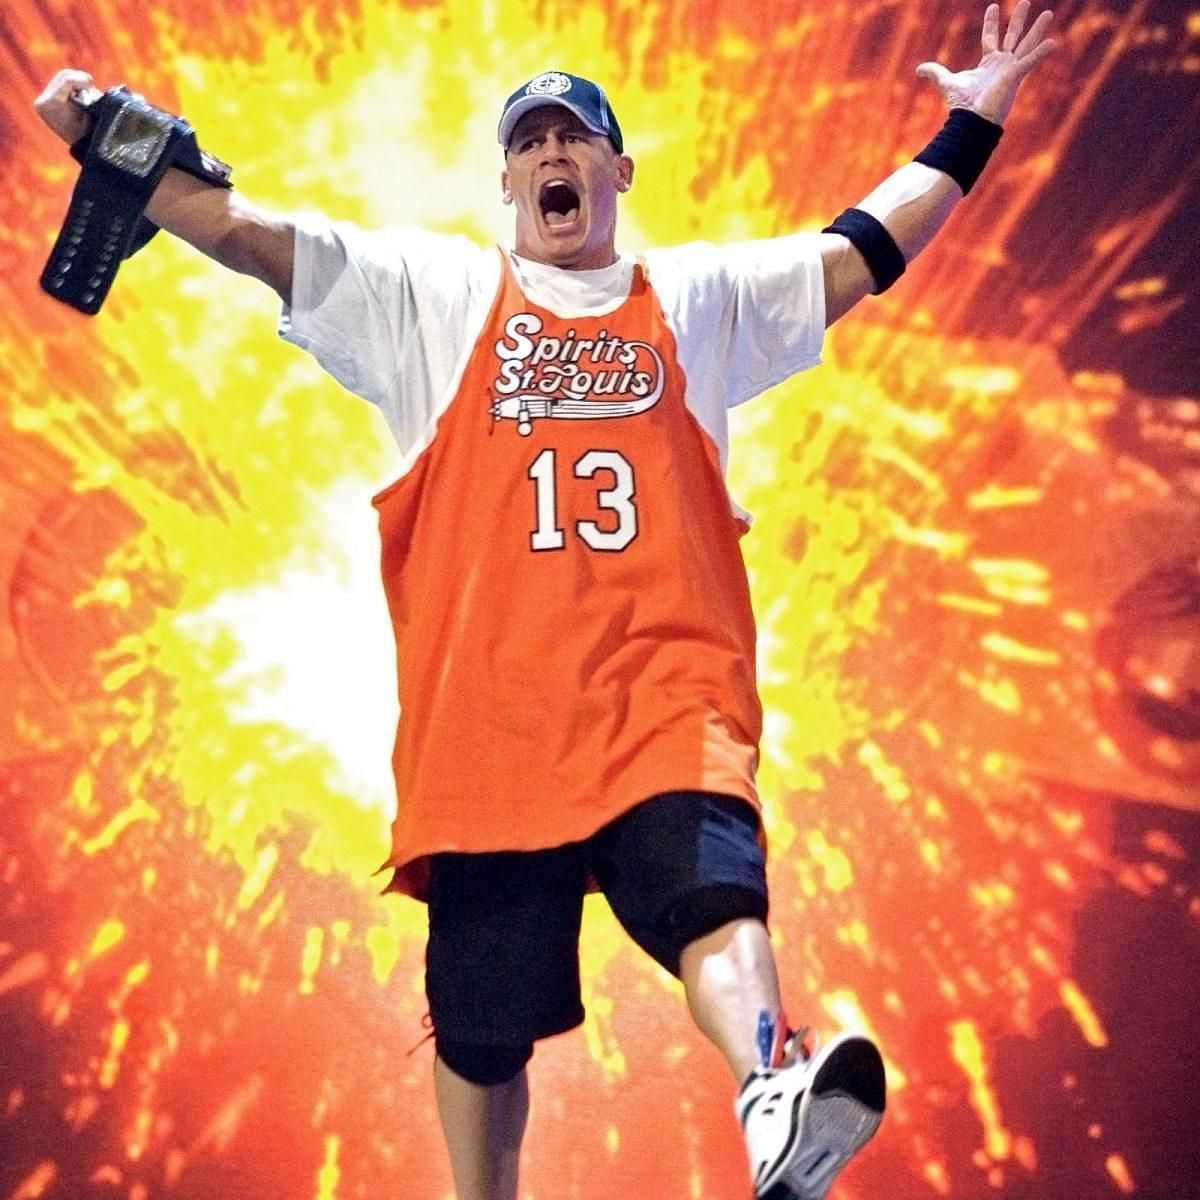 The Franchise John Cena started his road to stardom in the Ruthless Aggression Era.